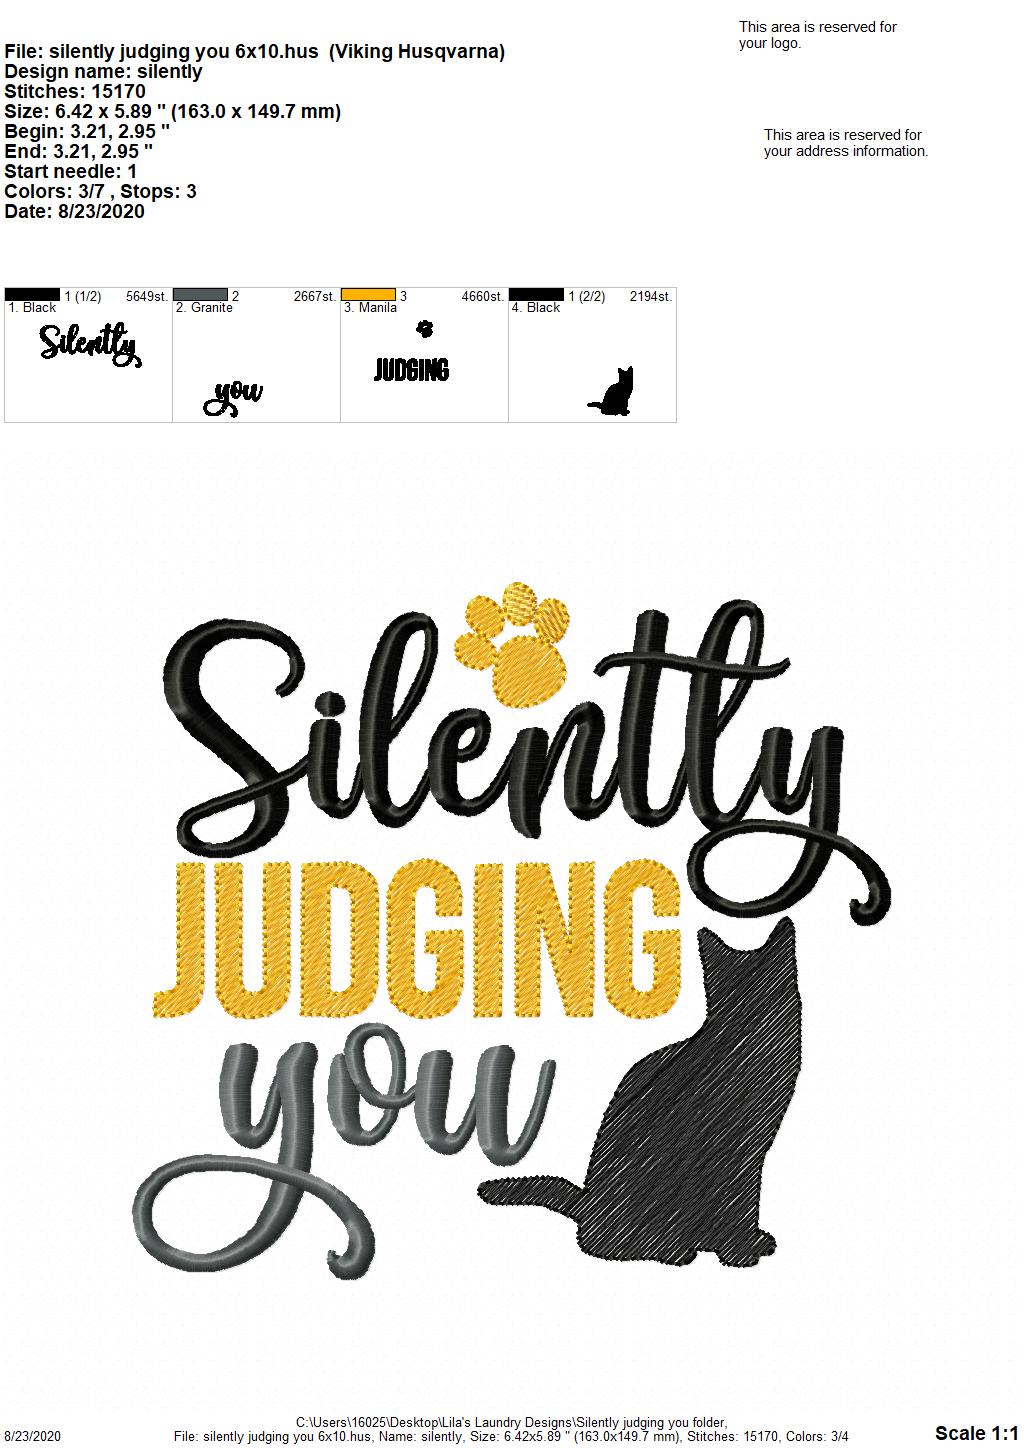 Silently Judging You - 2 Sizes - Digital Embroidery Design